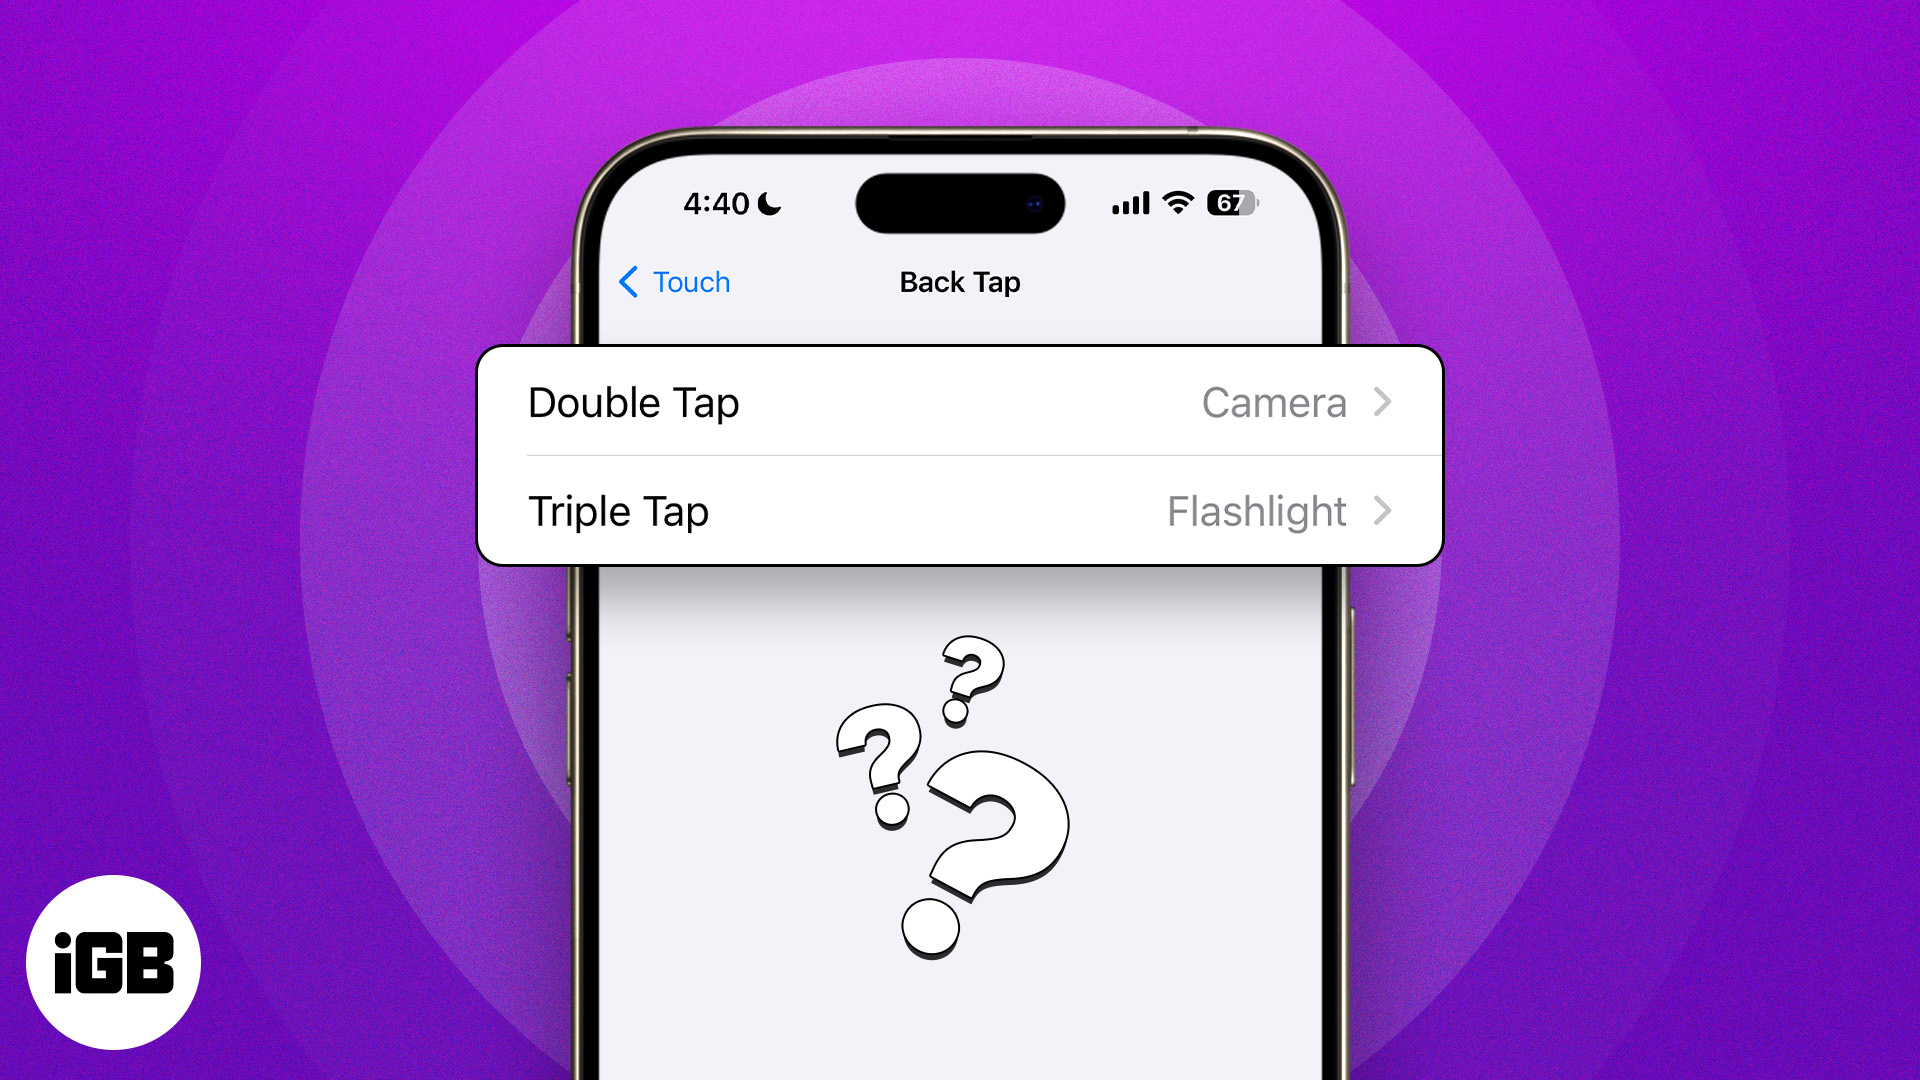 How to use Back Tap on iPhone